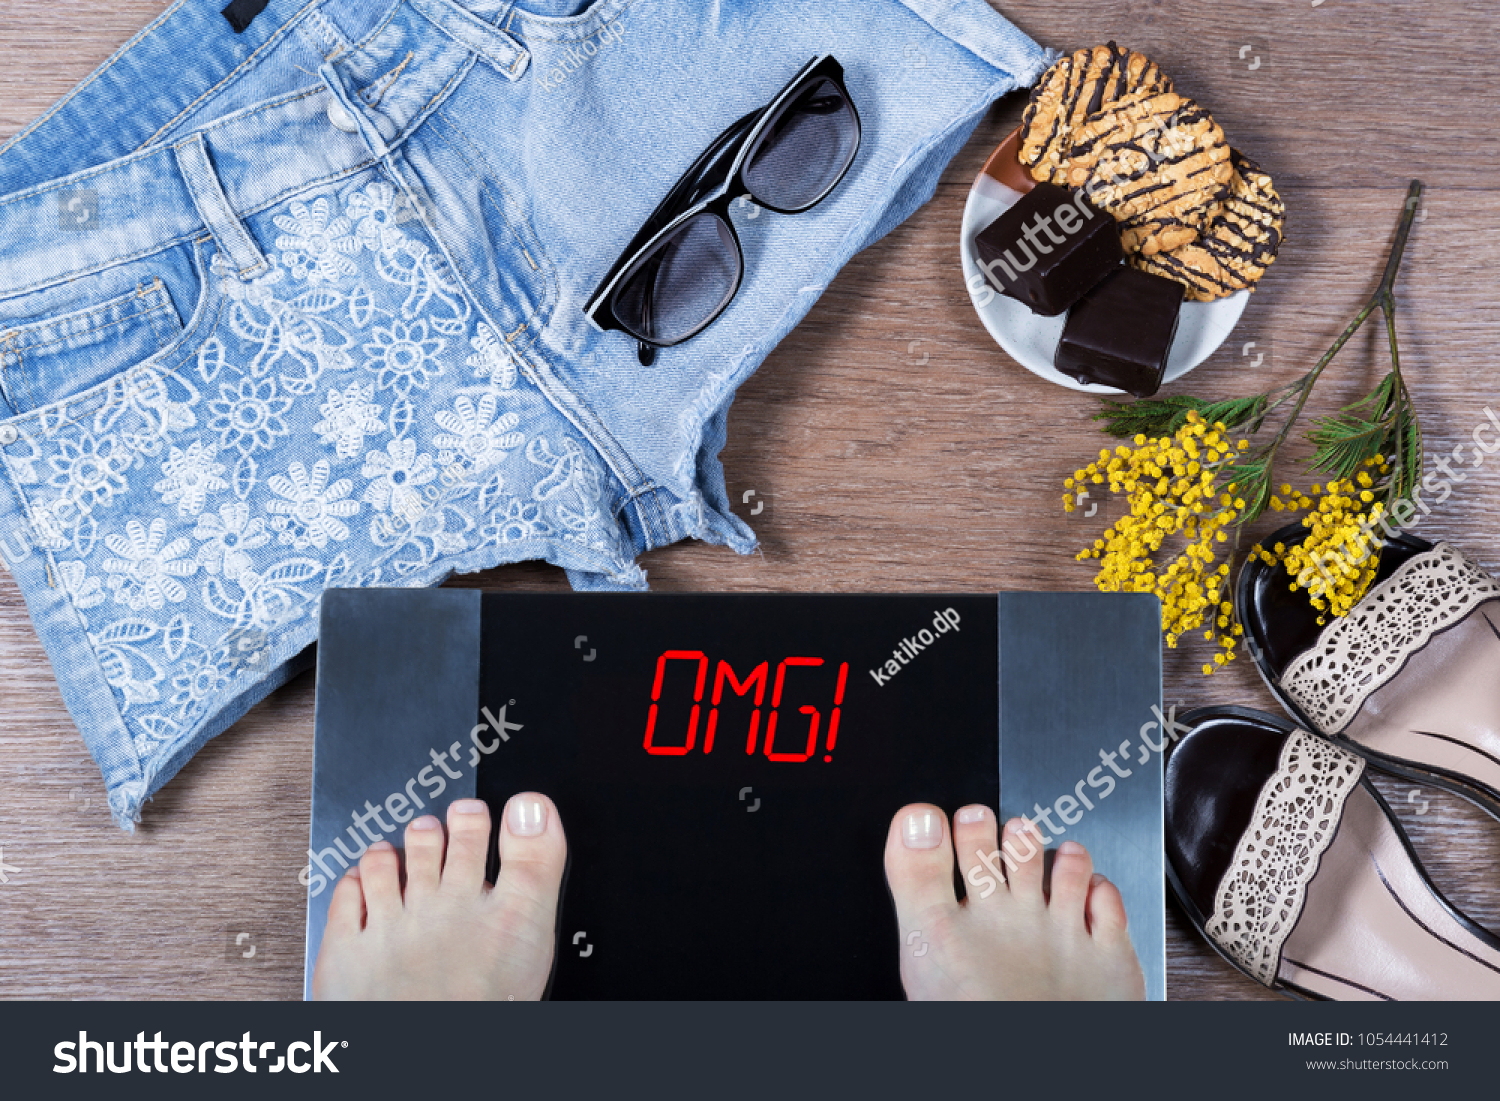 Digital scales with female feet and sign omg! surrounded by mimosa flowers, shorts and sweets. Effect of unhealthy food at body. Concept of being in form before spring and summer. Top view. Flat lay. #1054441412